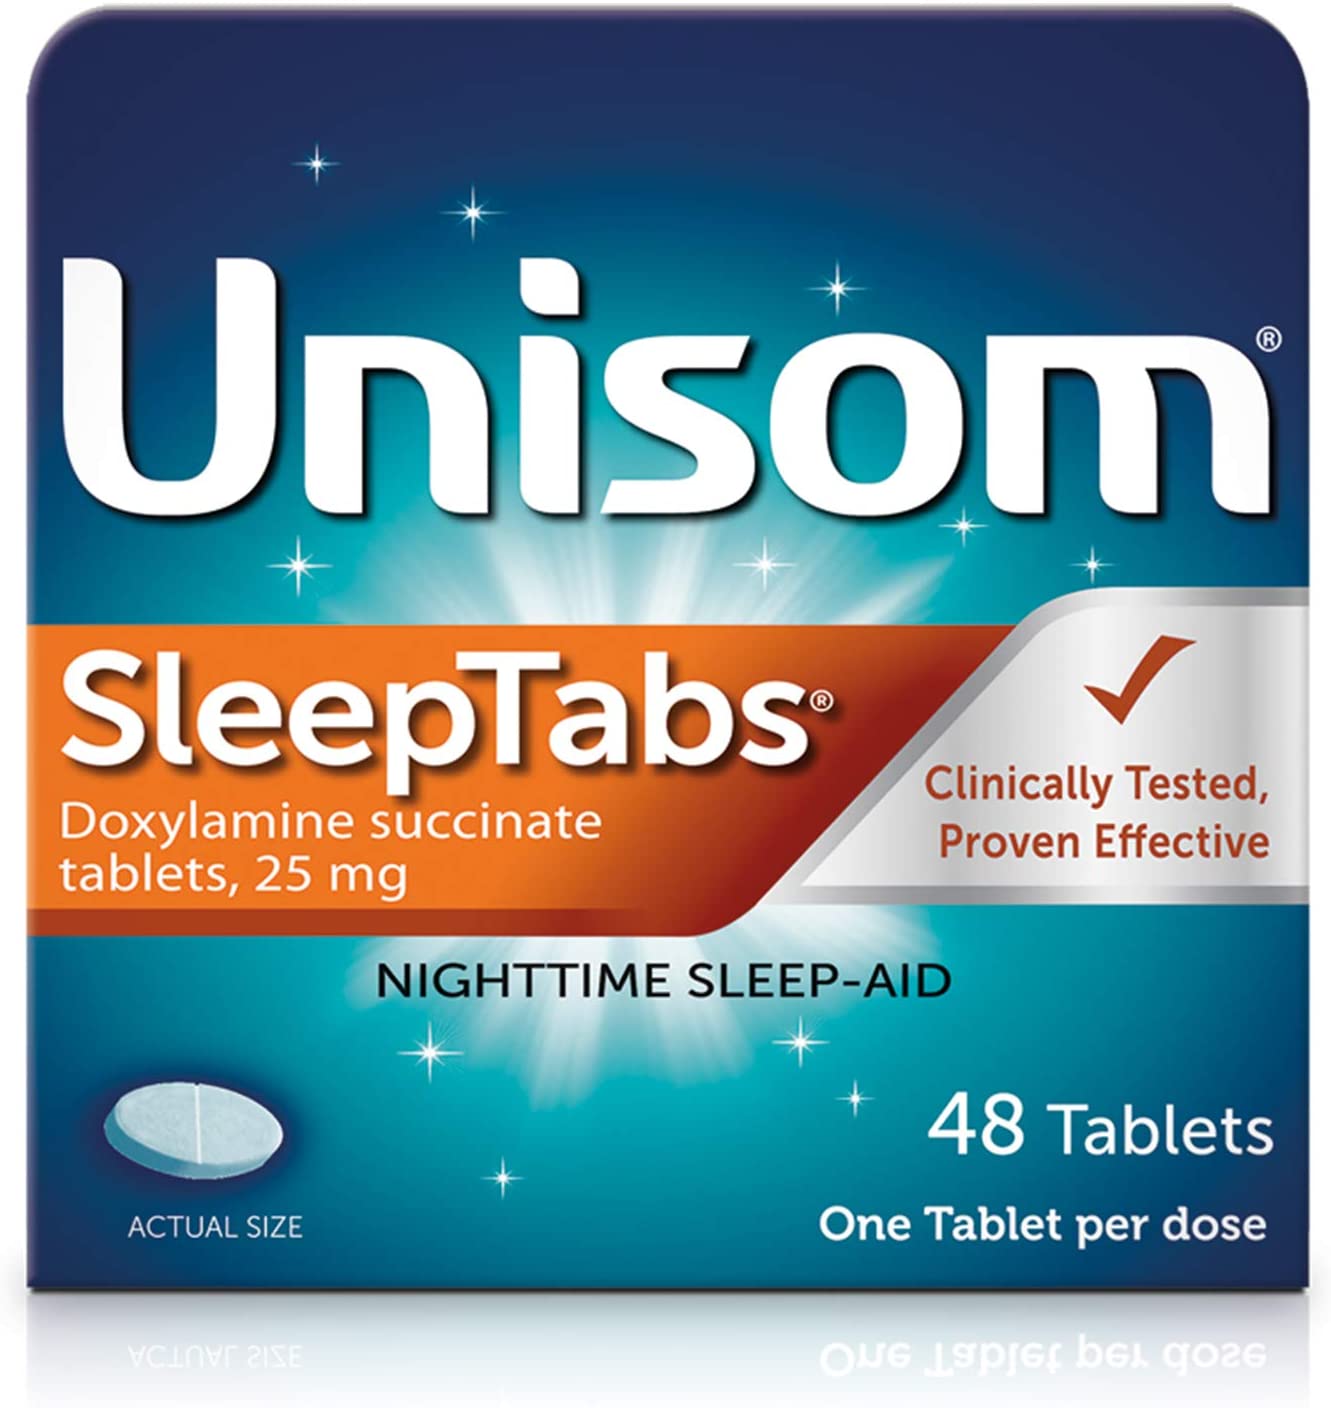 The 10 Best Over the Counter Sleep Aids for Better Rest in 2020